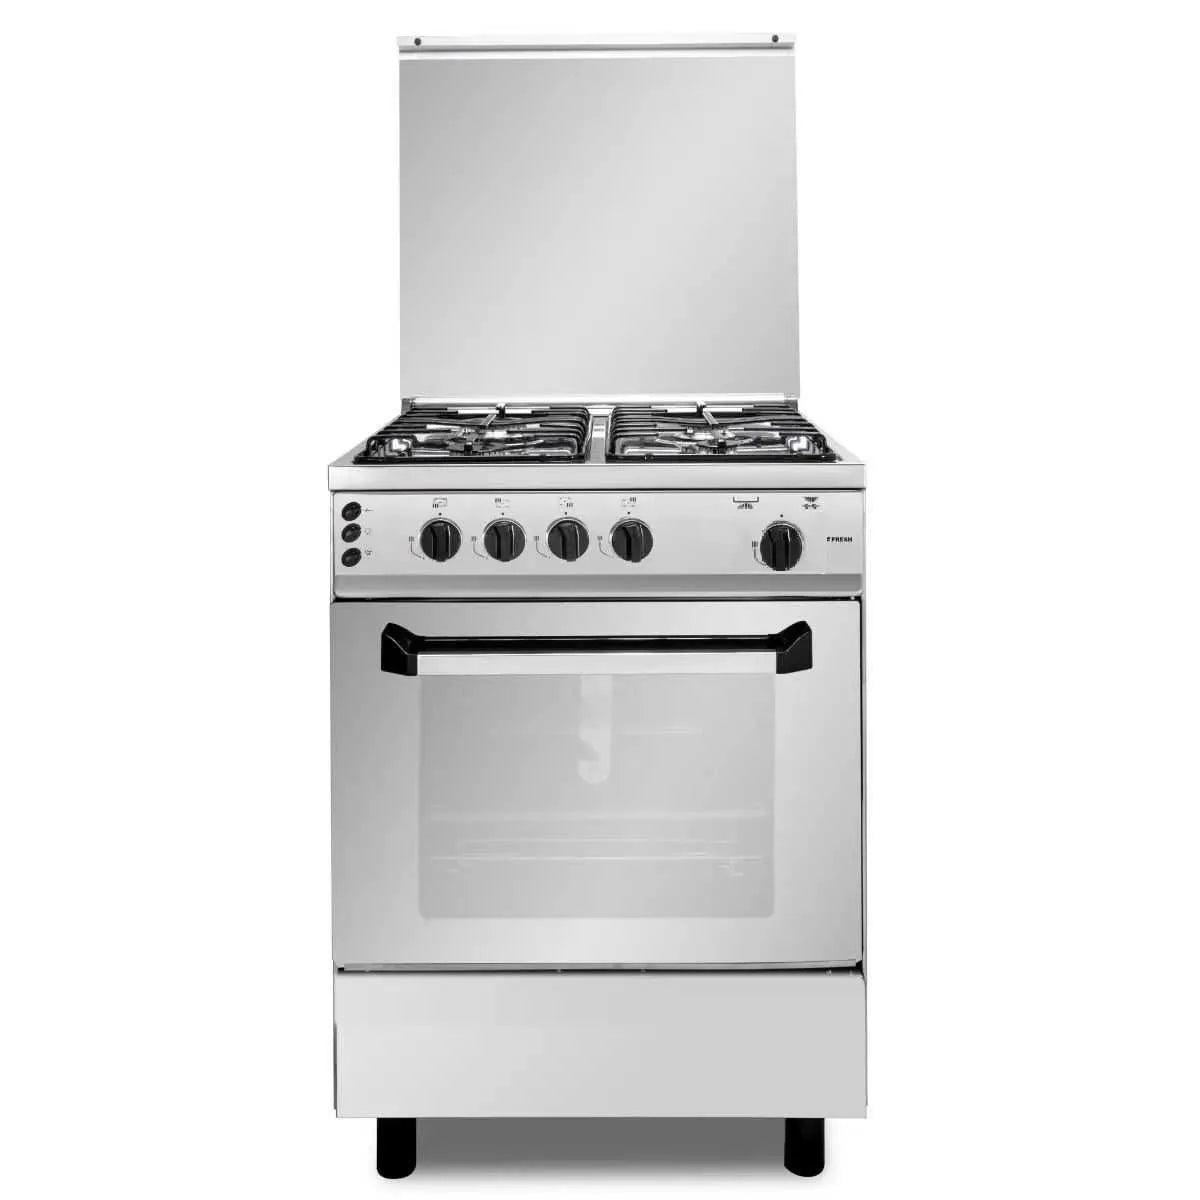 Fresh Master Gas Cooker, 4 Burners, 60 cm, Stainless Steel - 500017281